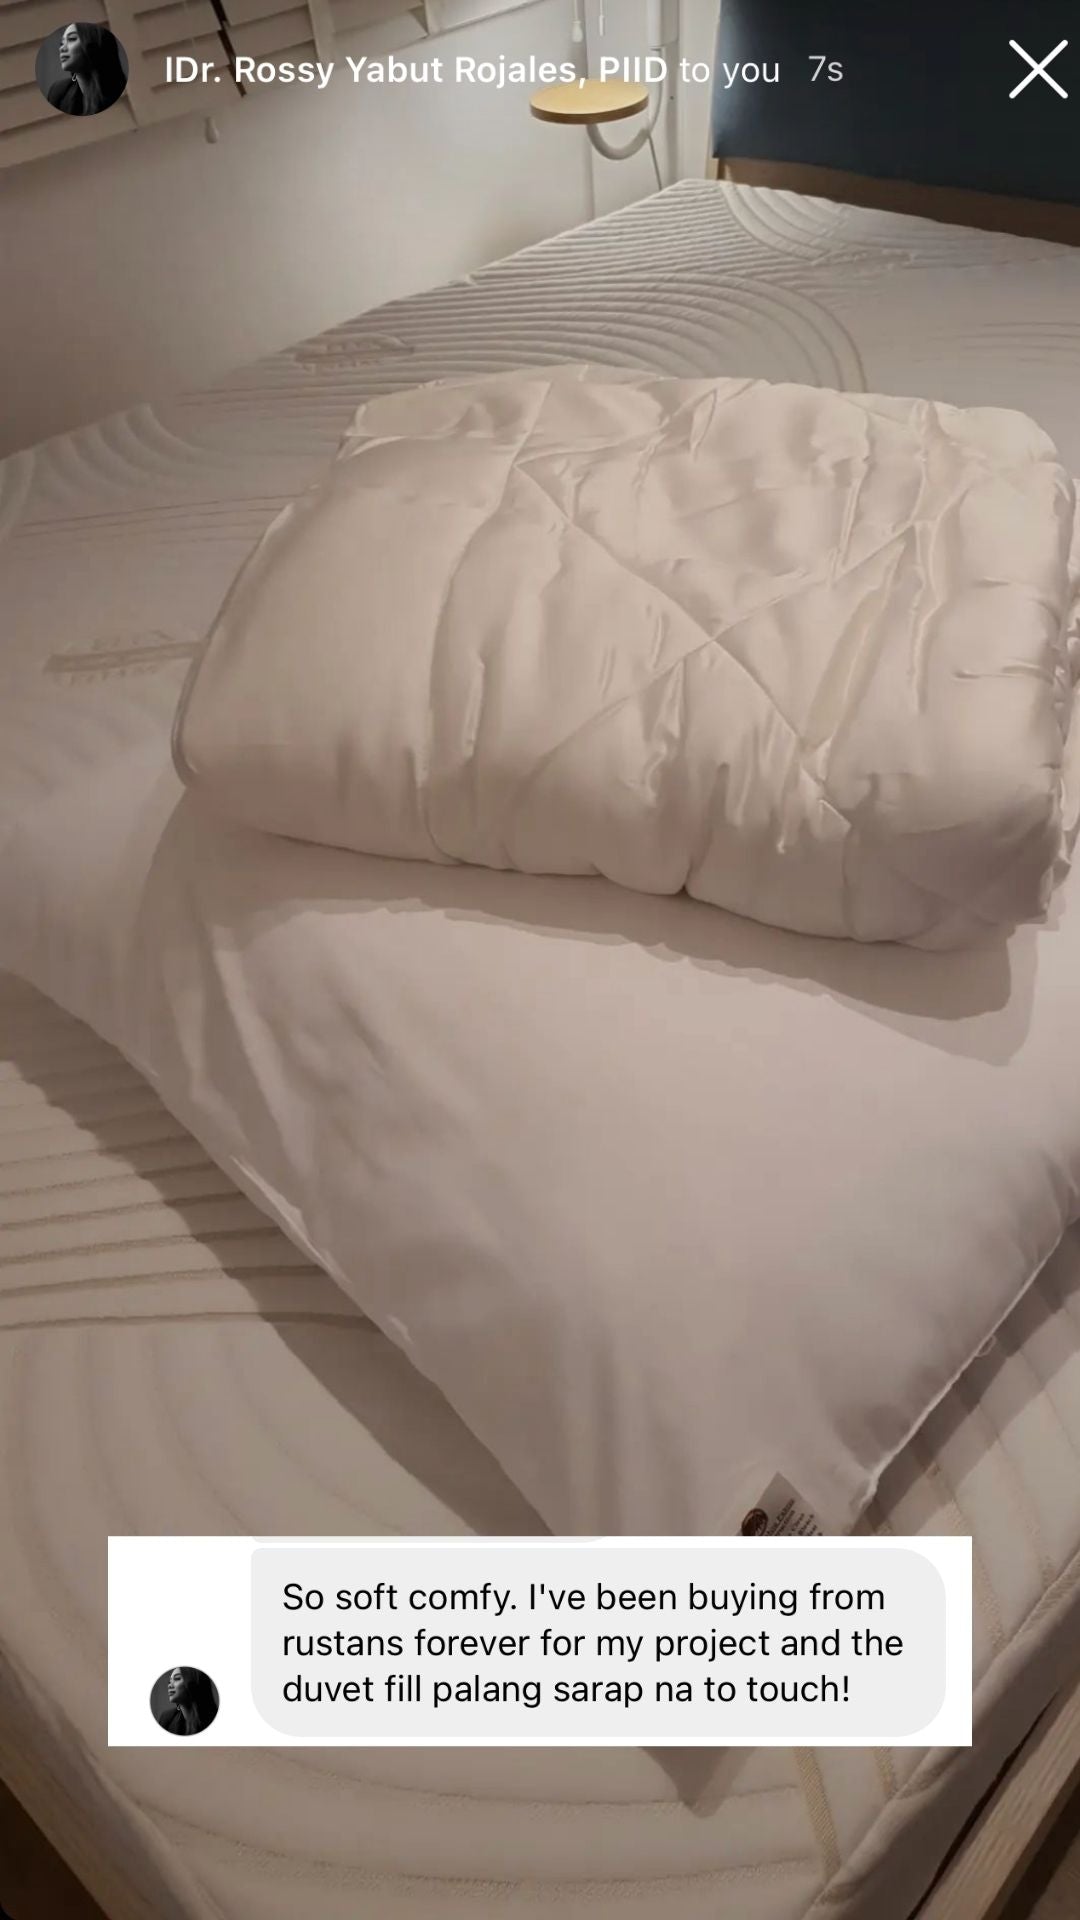 ava and ava review - cool, buttery smooth and silky soft organic bamboo lyocell duvet or comforter by idr rossy rojales (hurray design)